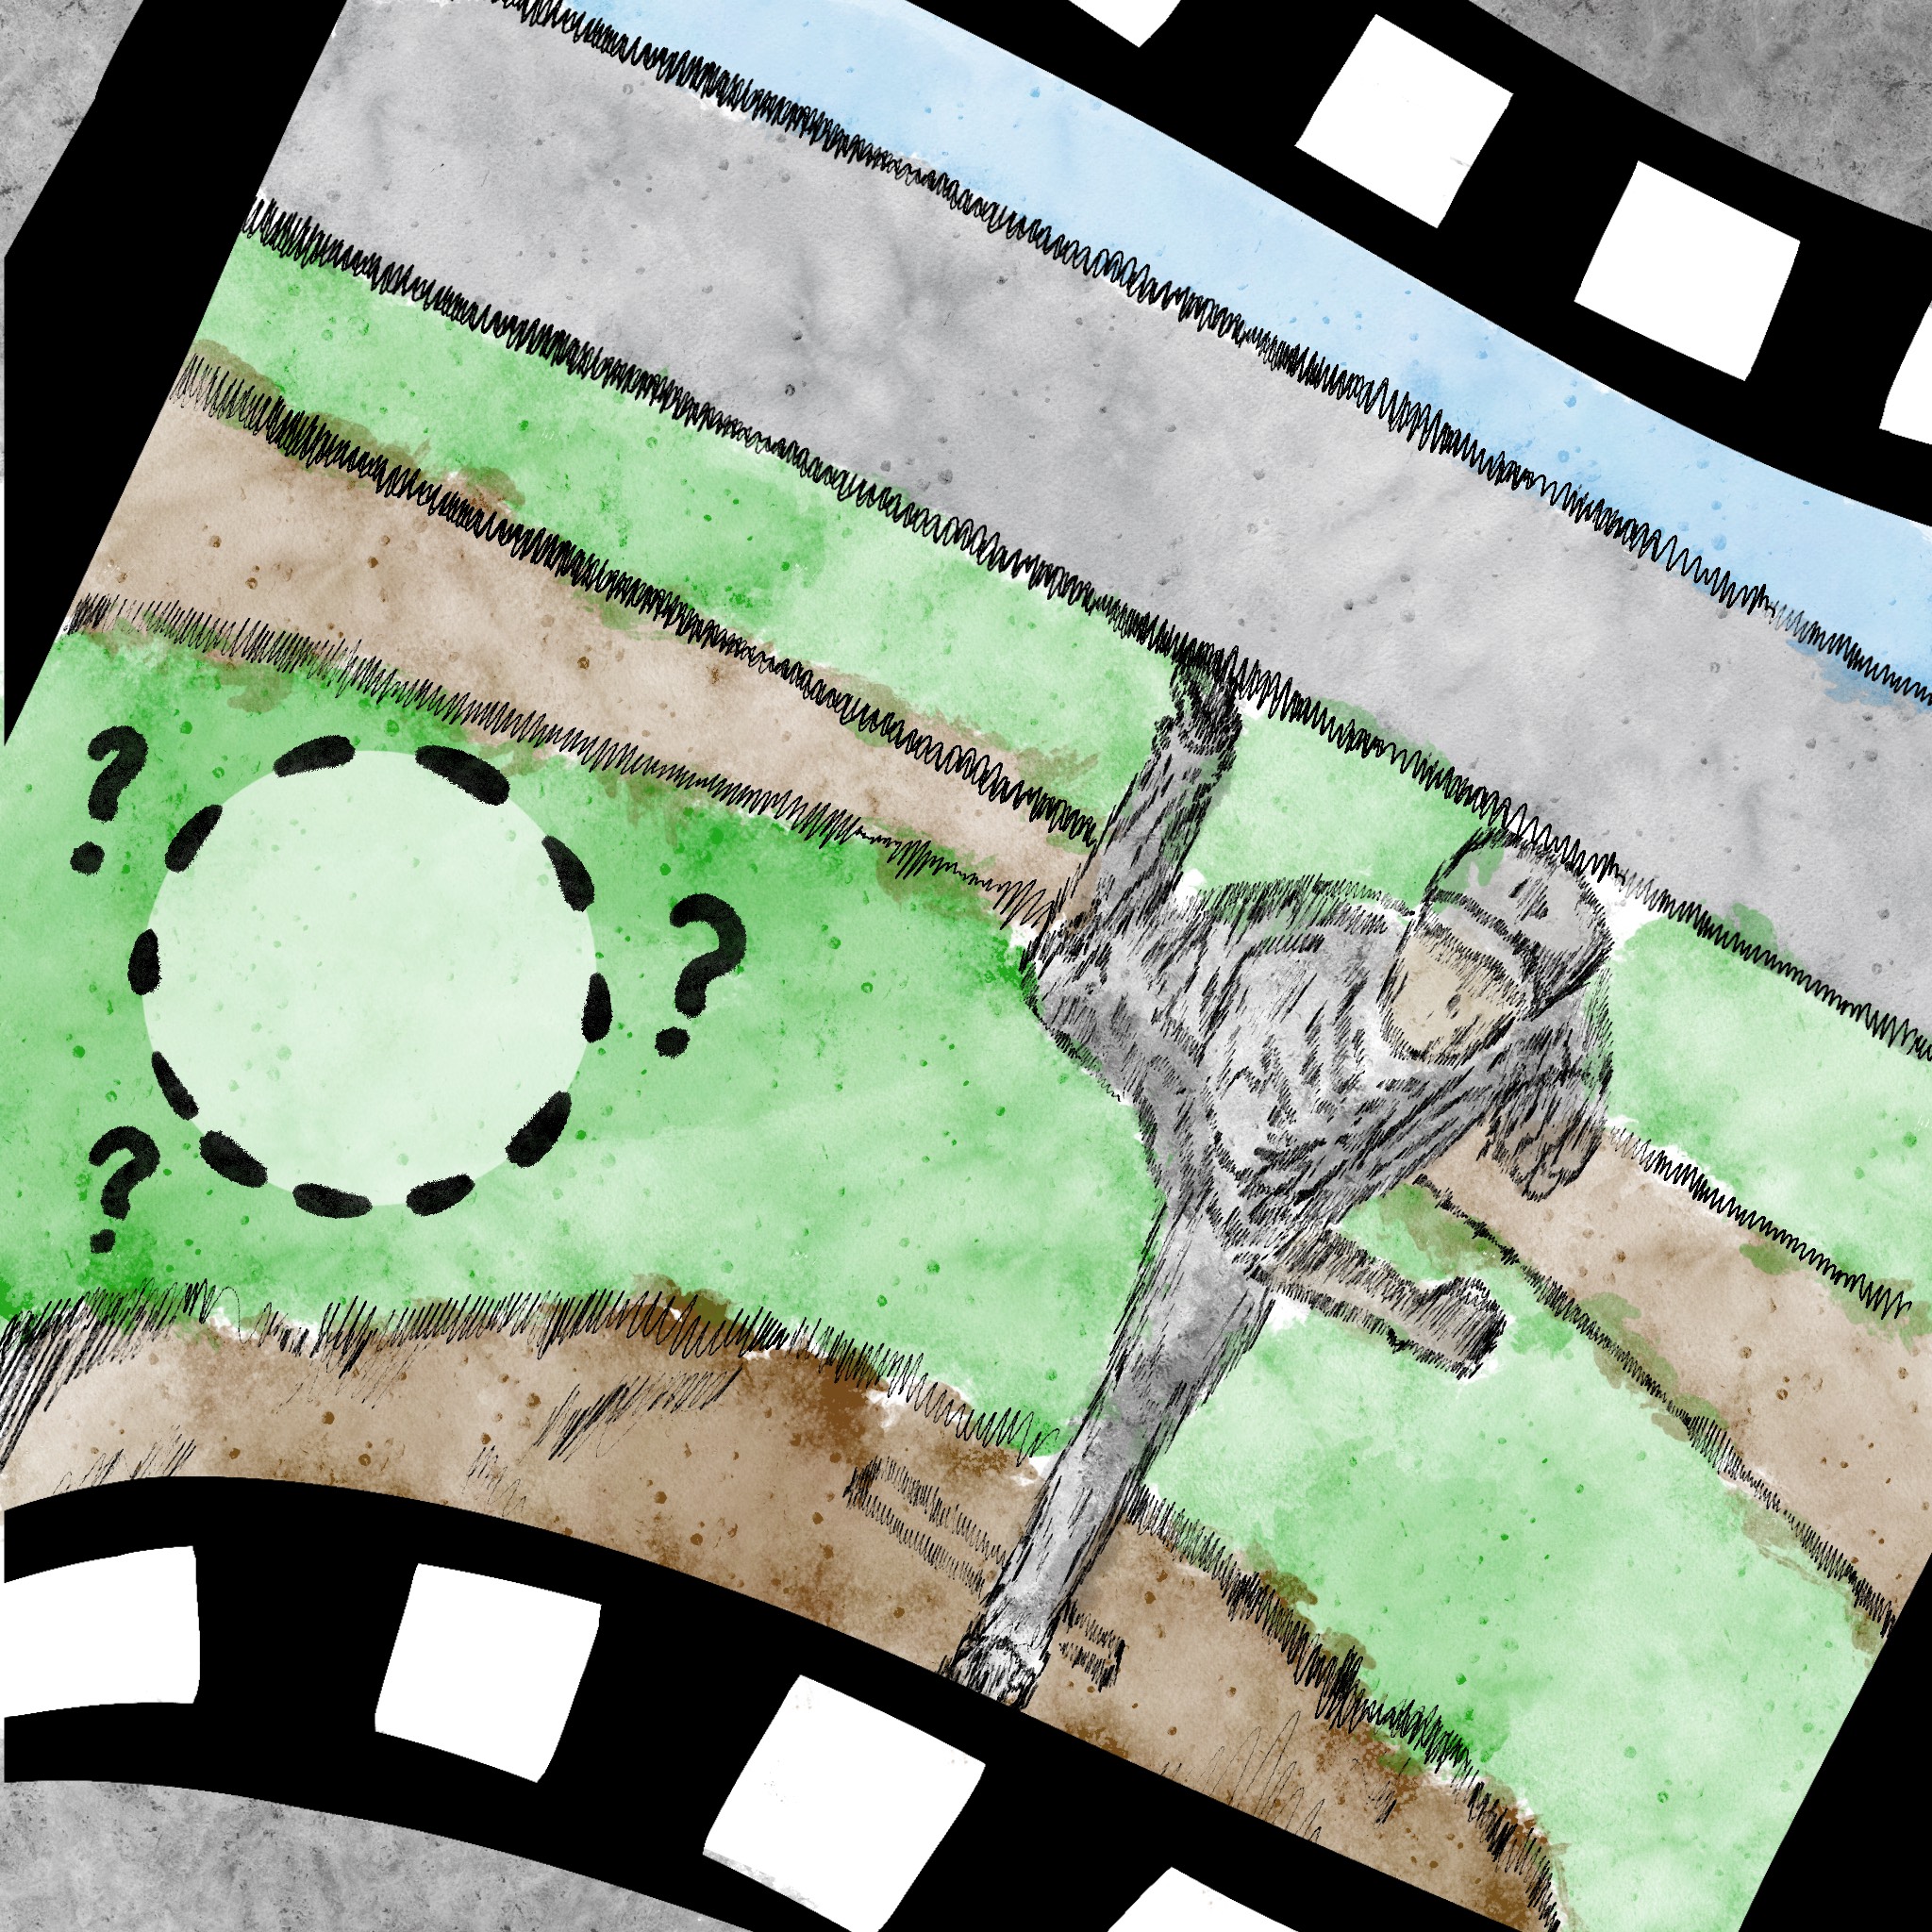 Thumbnail for Sports movies are cliche, but that’s okay